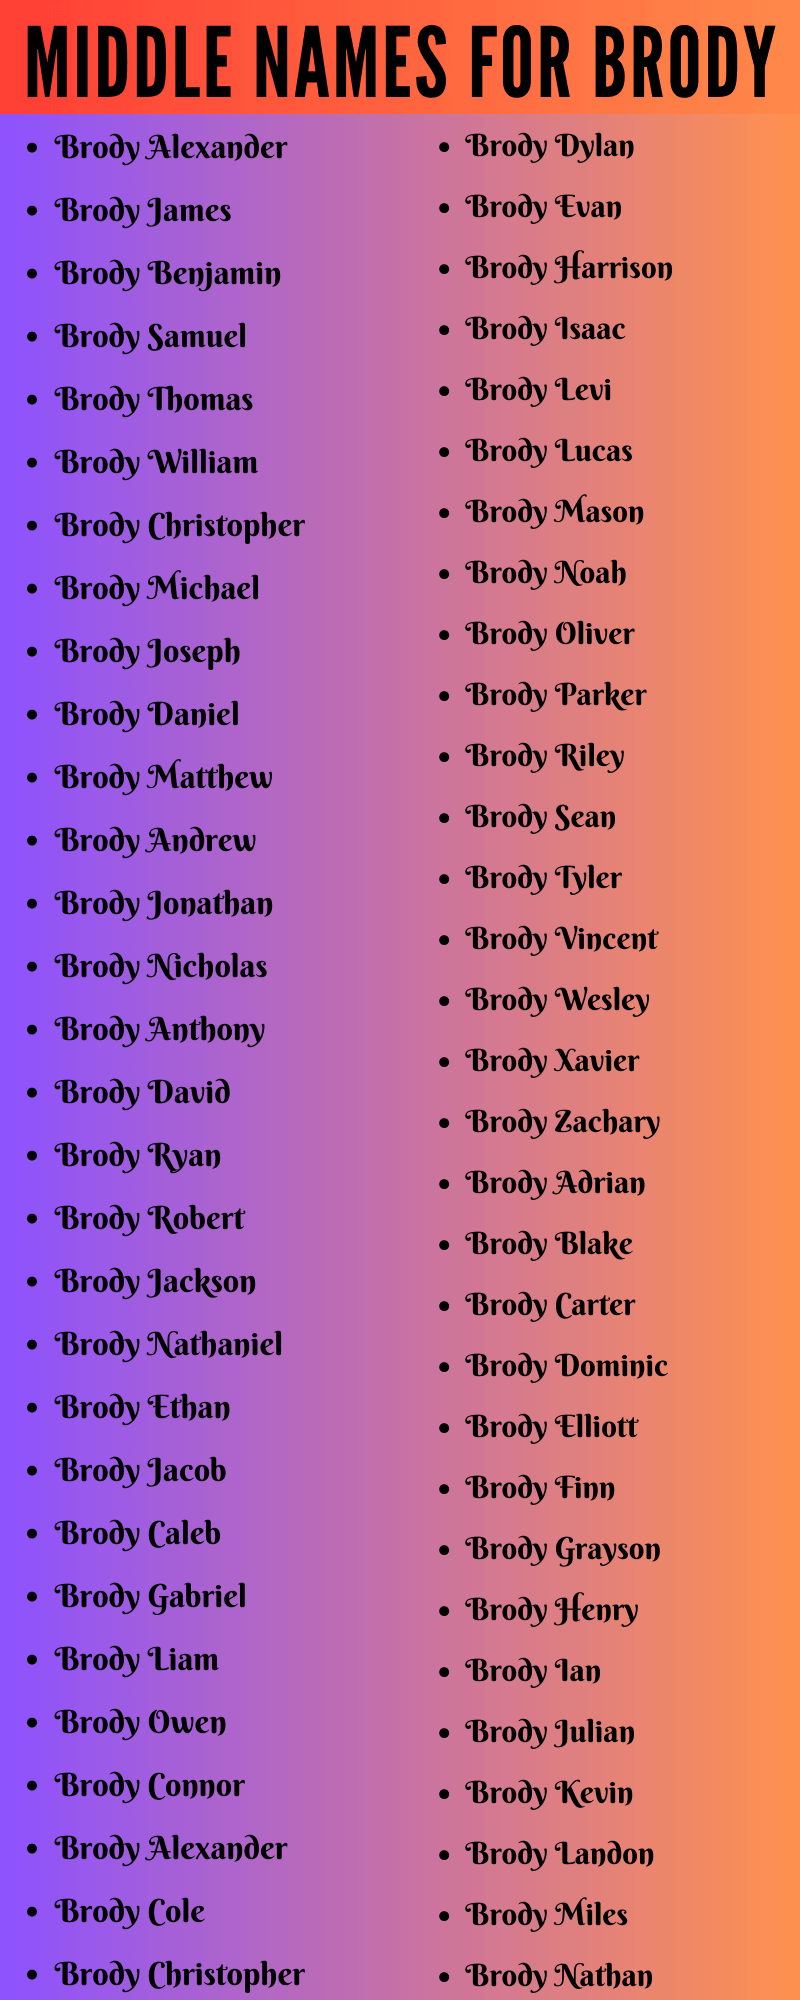 400 Best Middle Names For Brody